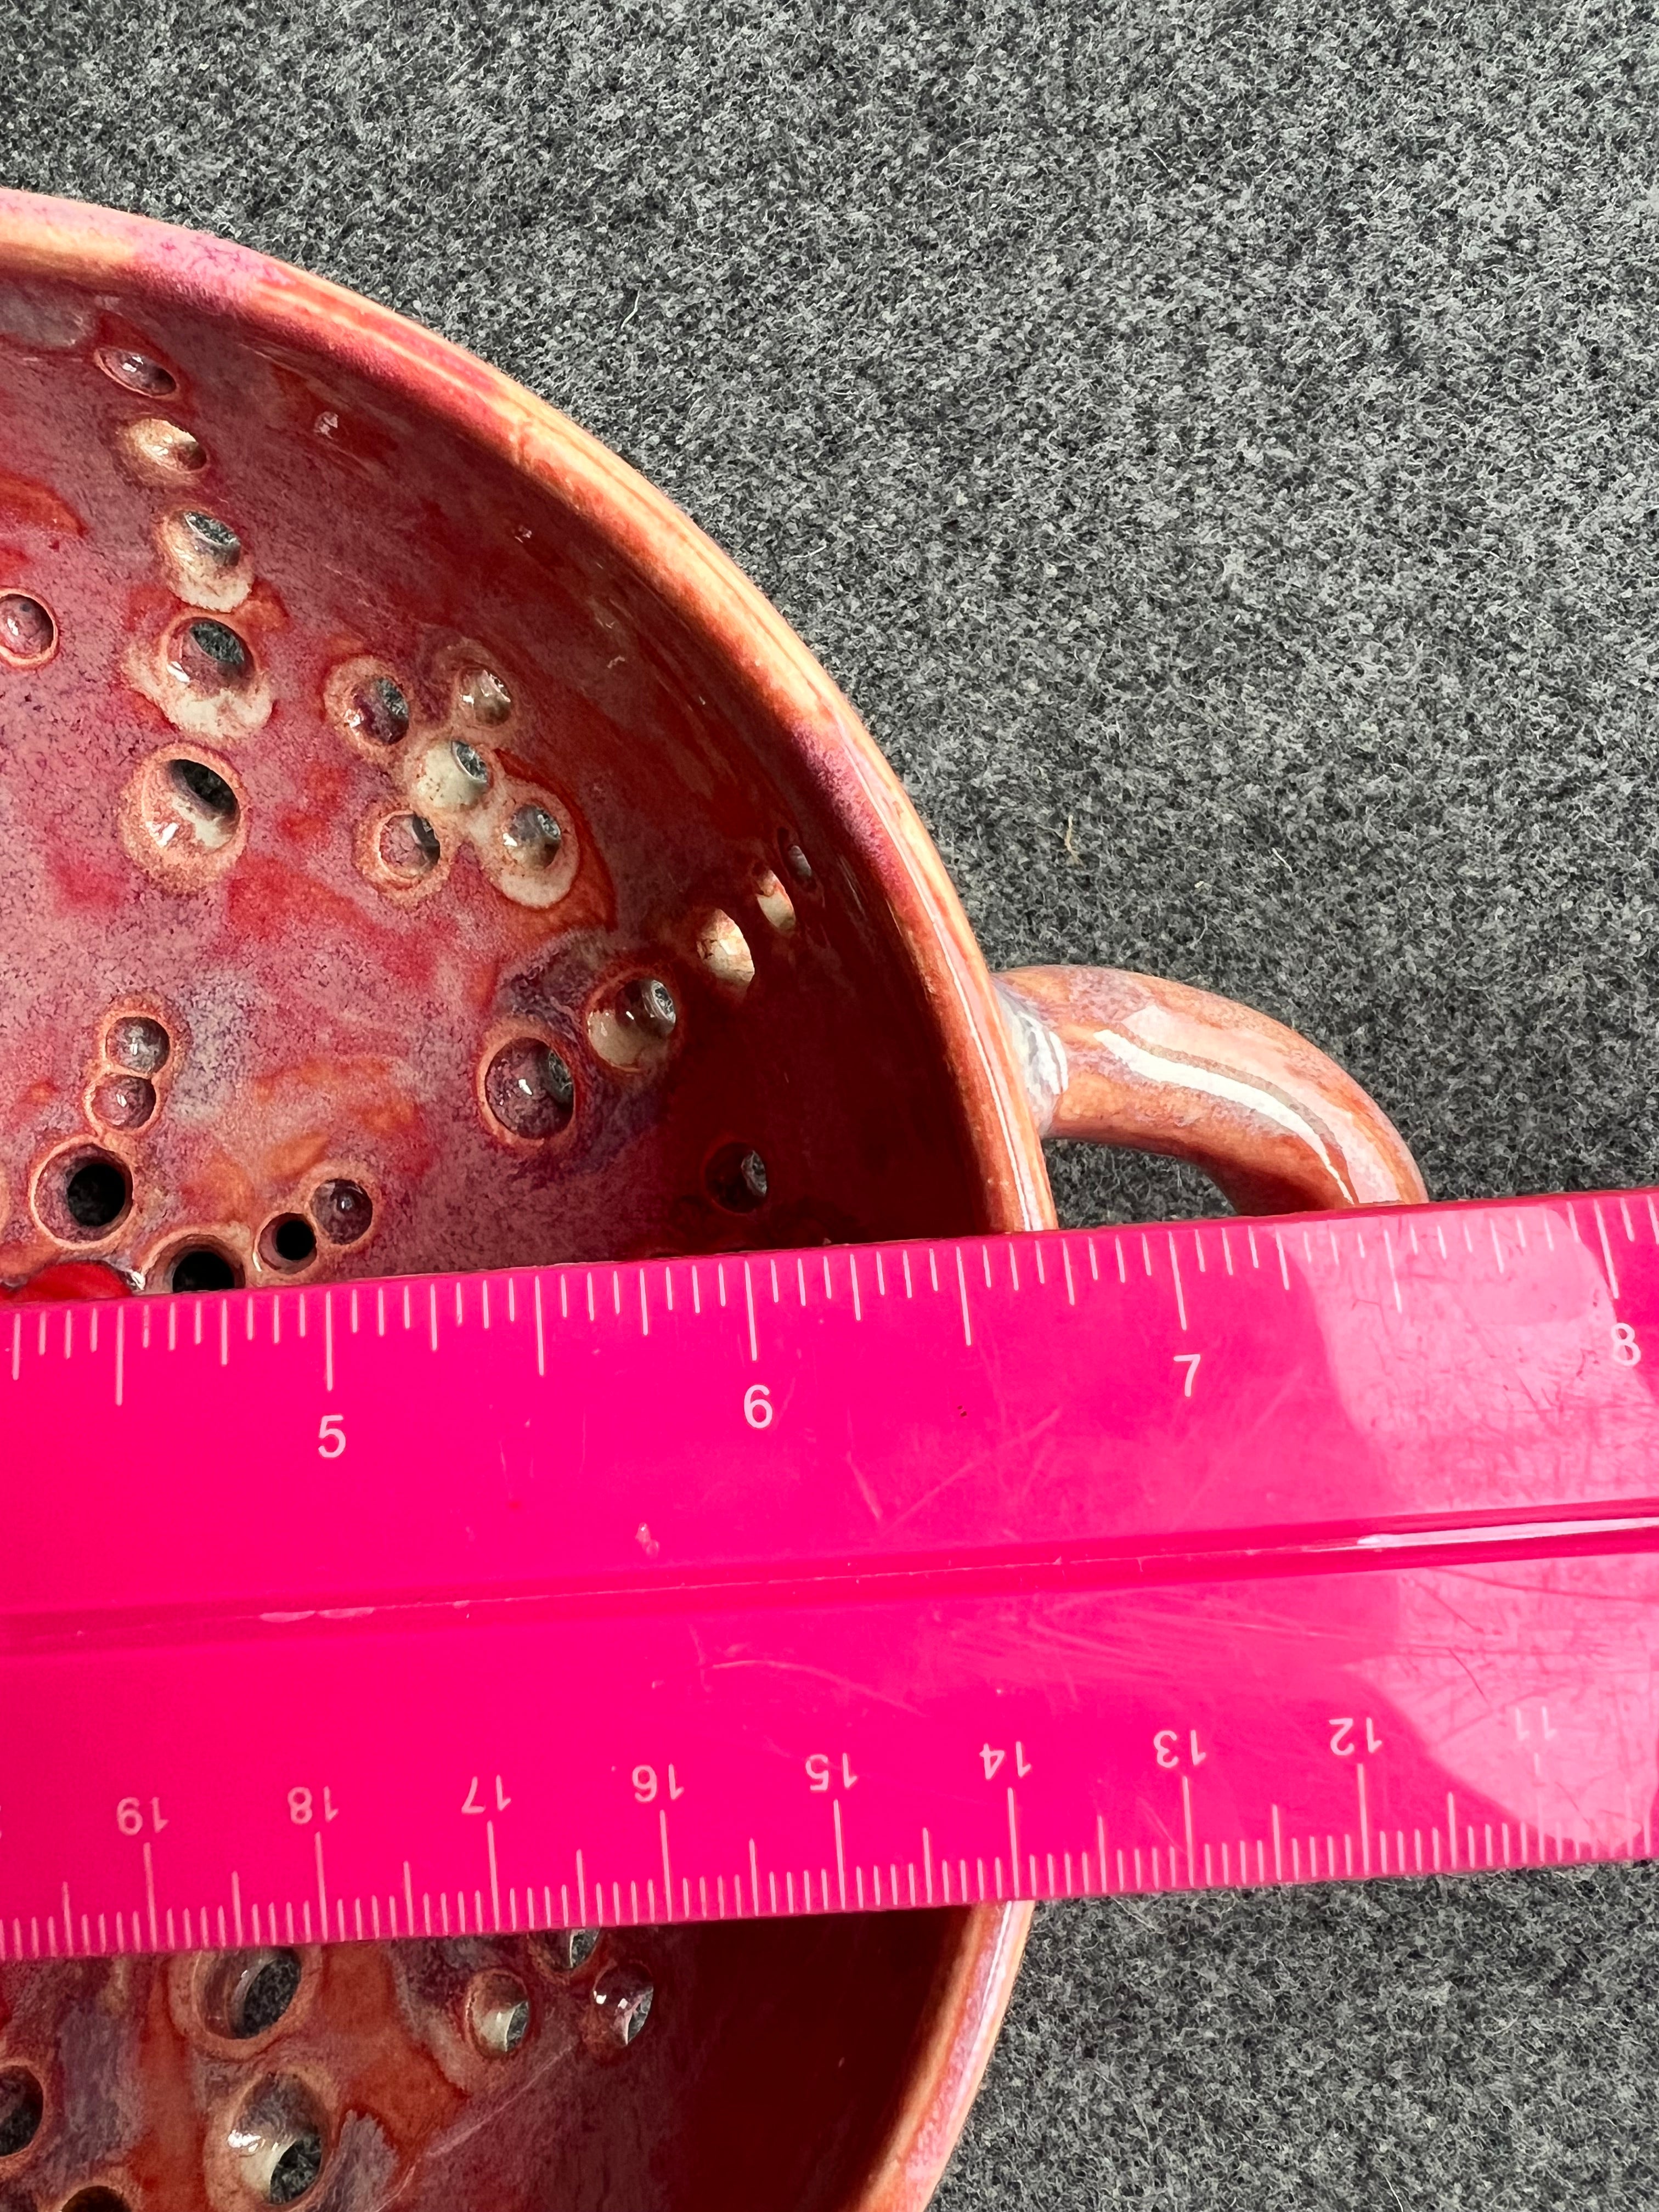 A bright pink ruler sits on top of a pink bowl with two small loop handles, and intricate pierced holes and a bright red heart at the base sits in front of a grey background. The ruler measure 6.75 inches.